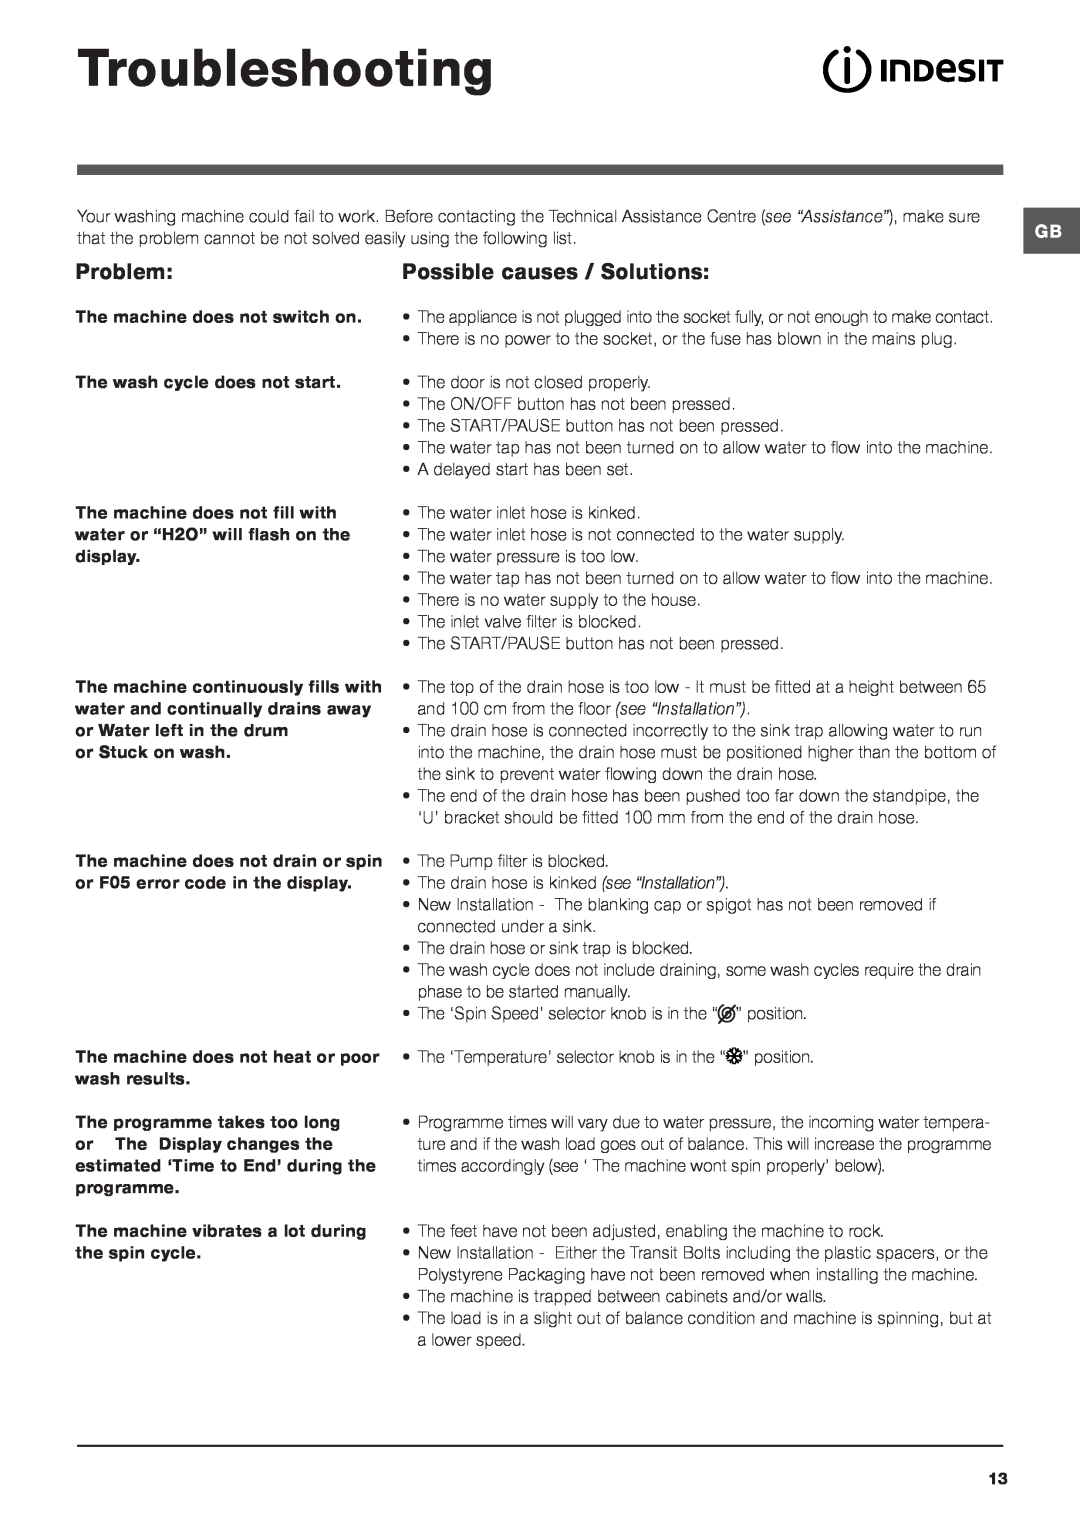 Indesit IWD 6125 manual Troubleshooting, Problem, Possible causes / Solutions 